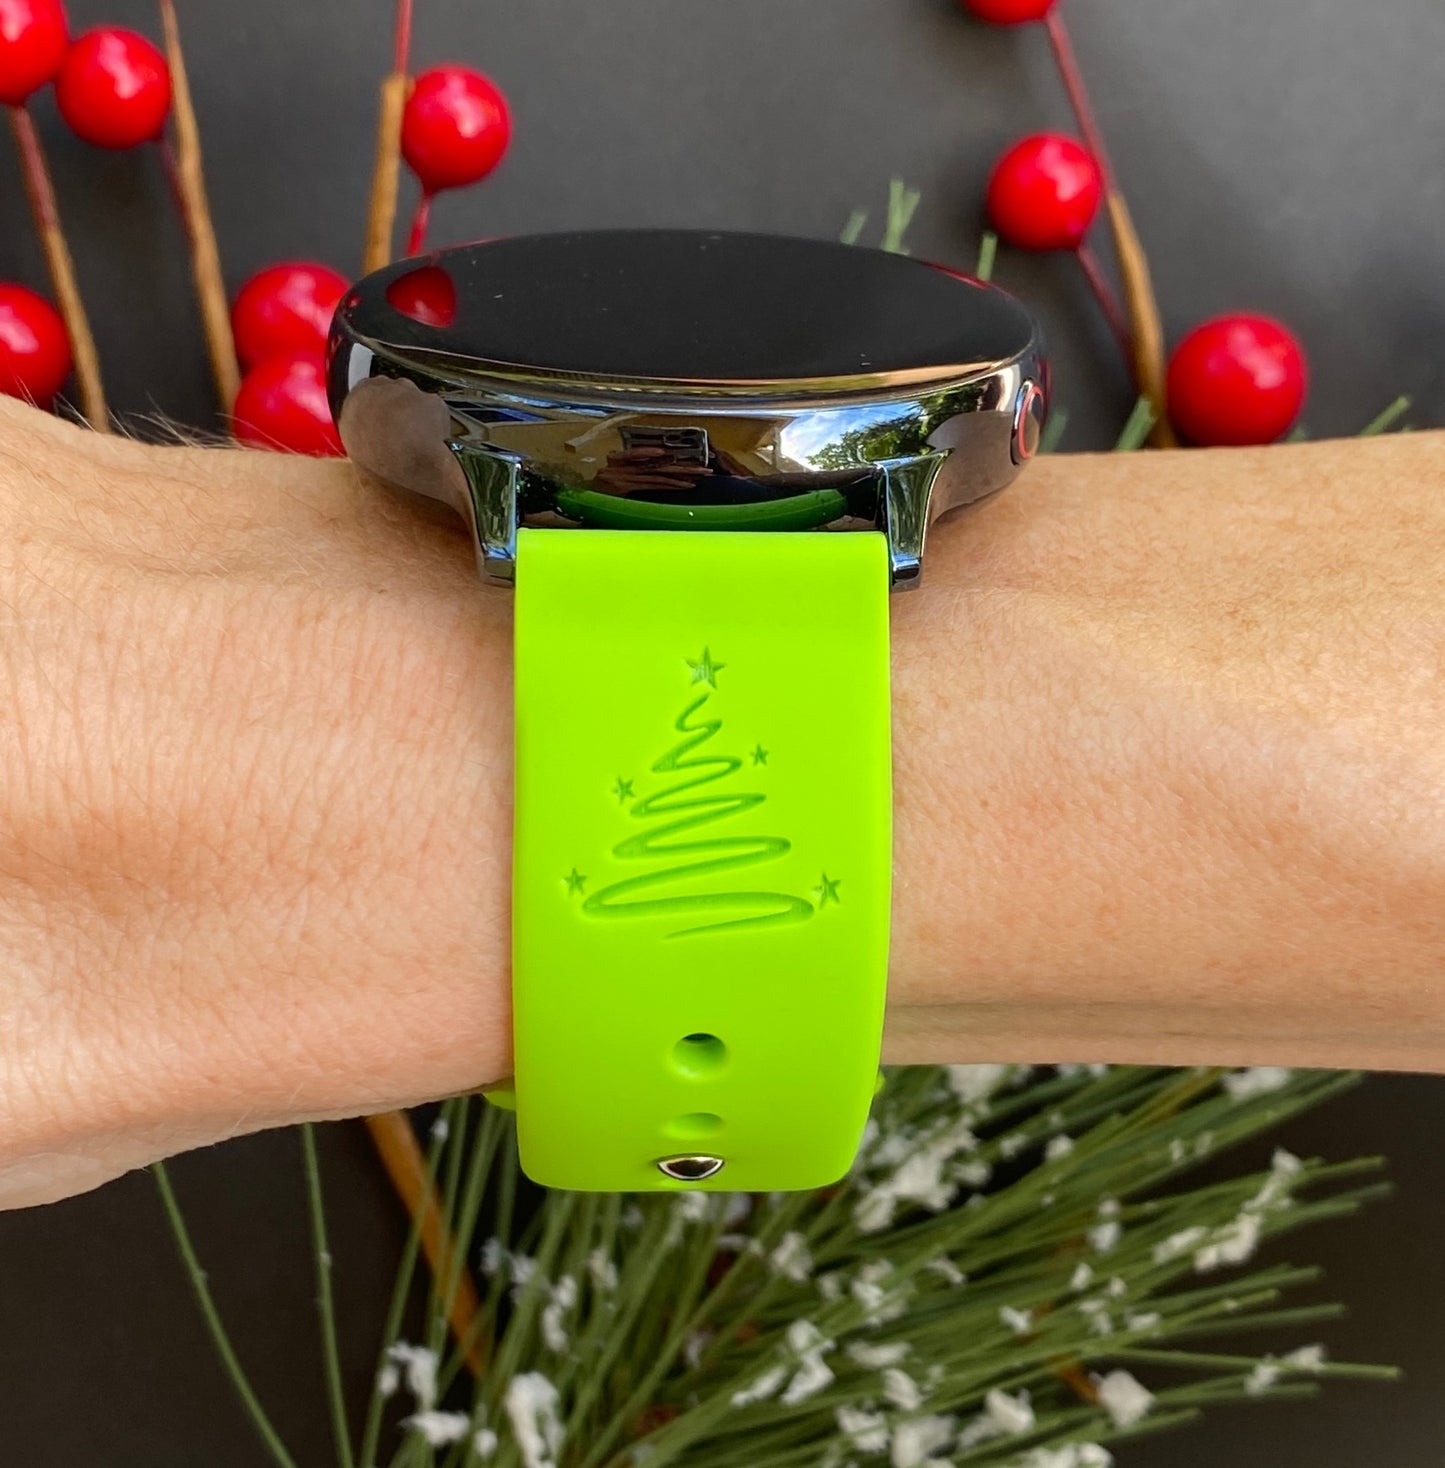 Merry and Bright 20mm Samsung Galaxy Watch Band